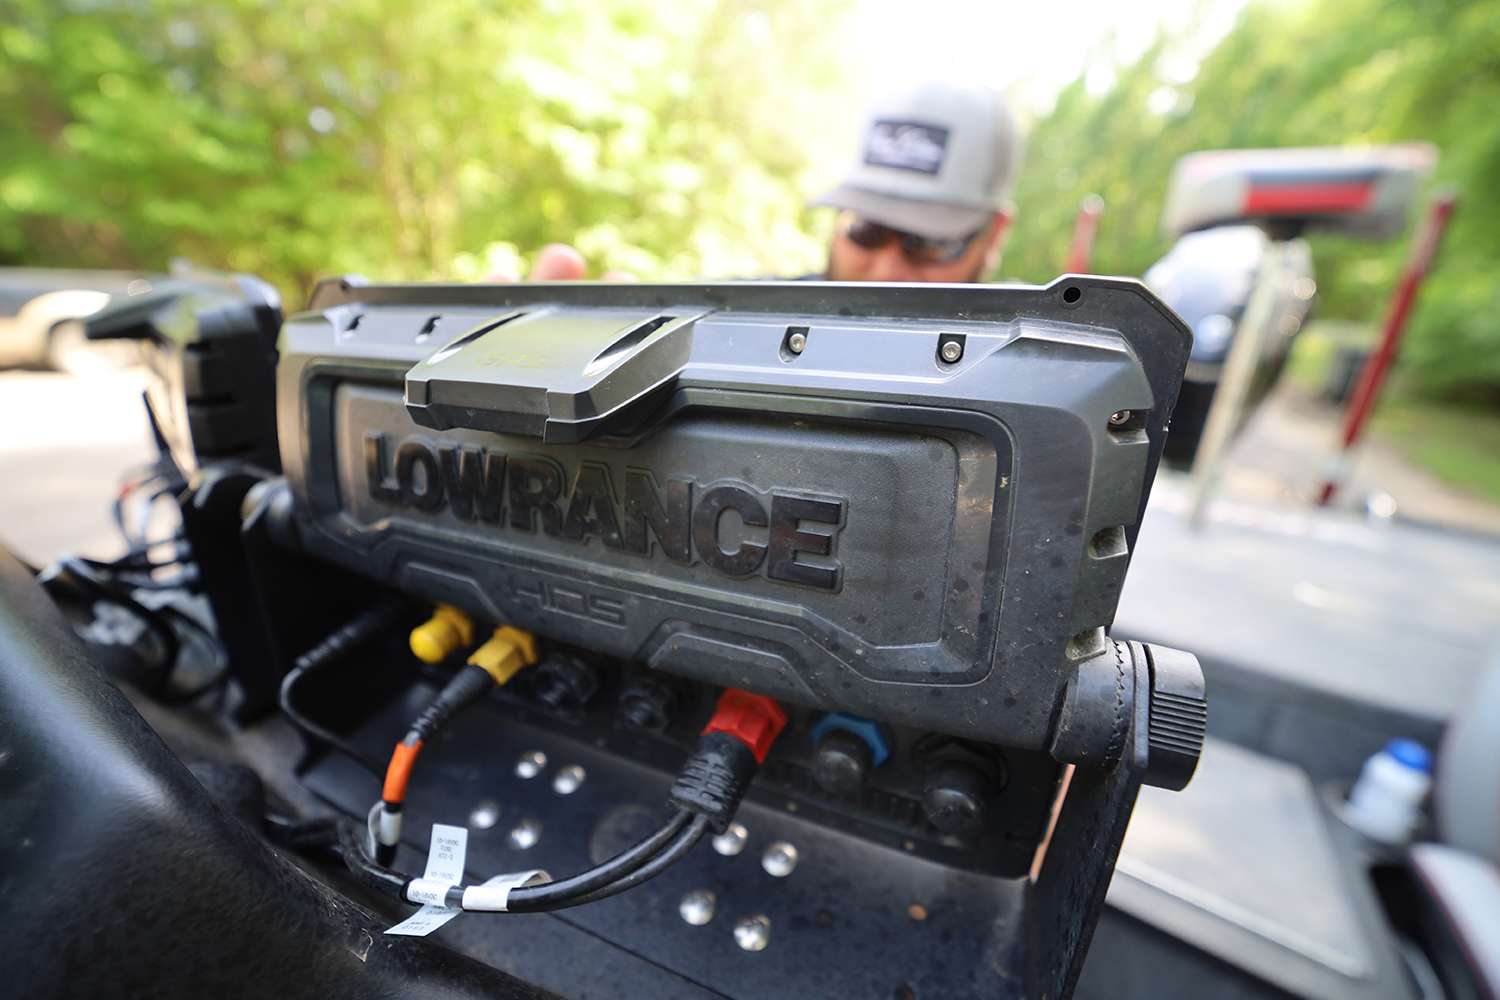 Dual Lowrance HDS units provide the necessary information to find fish and to mark new spots for a return visit.